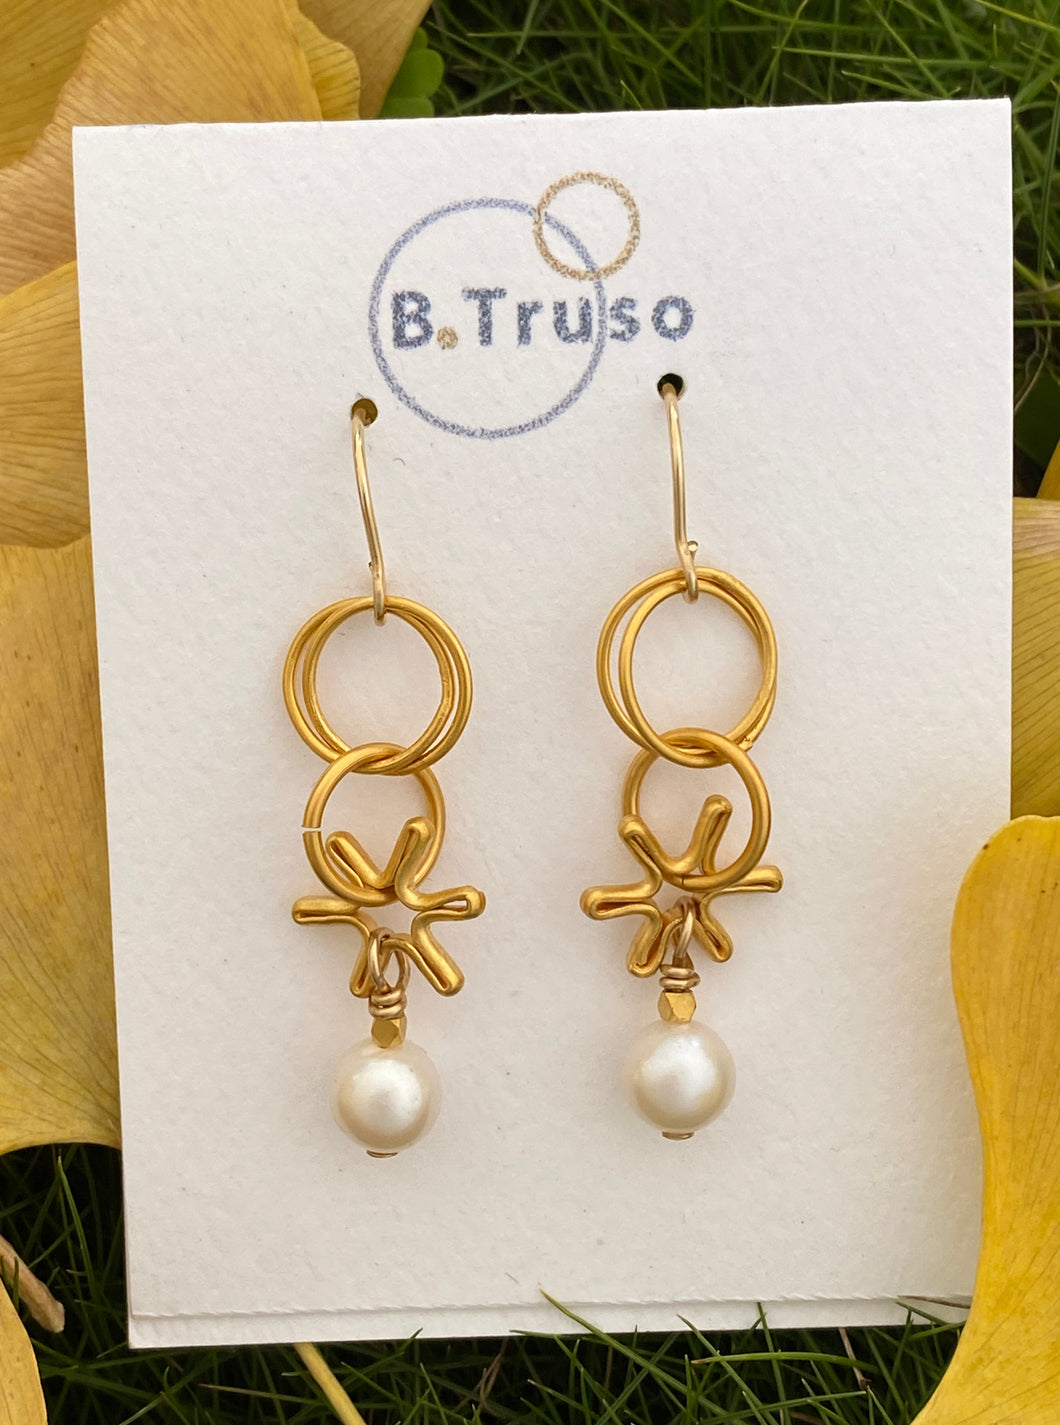 Earrings made with dangling elements of 24kt gold plate over sterling silver circles  and freshwater pearls